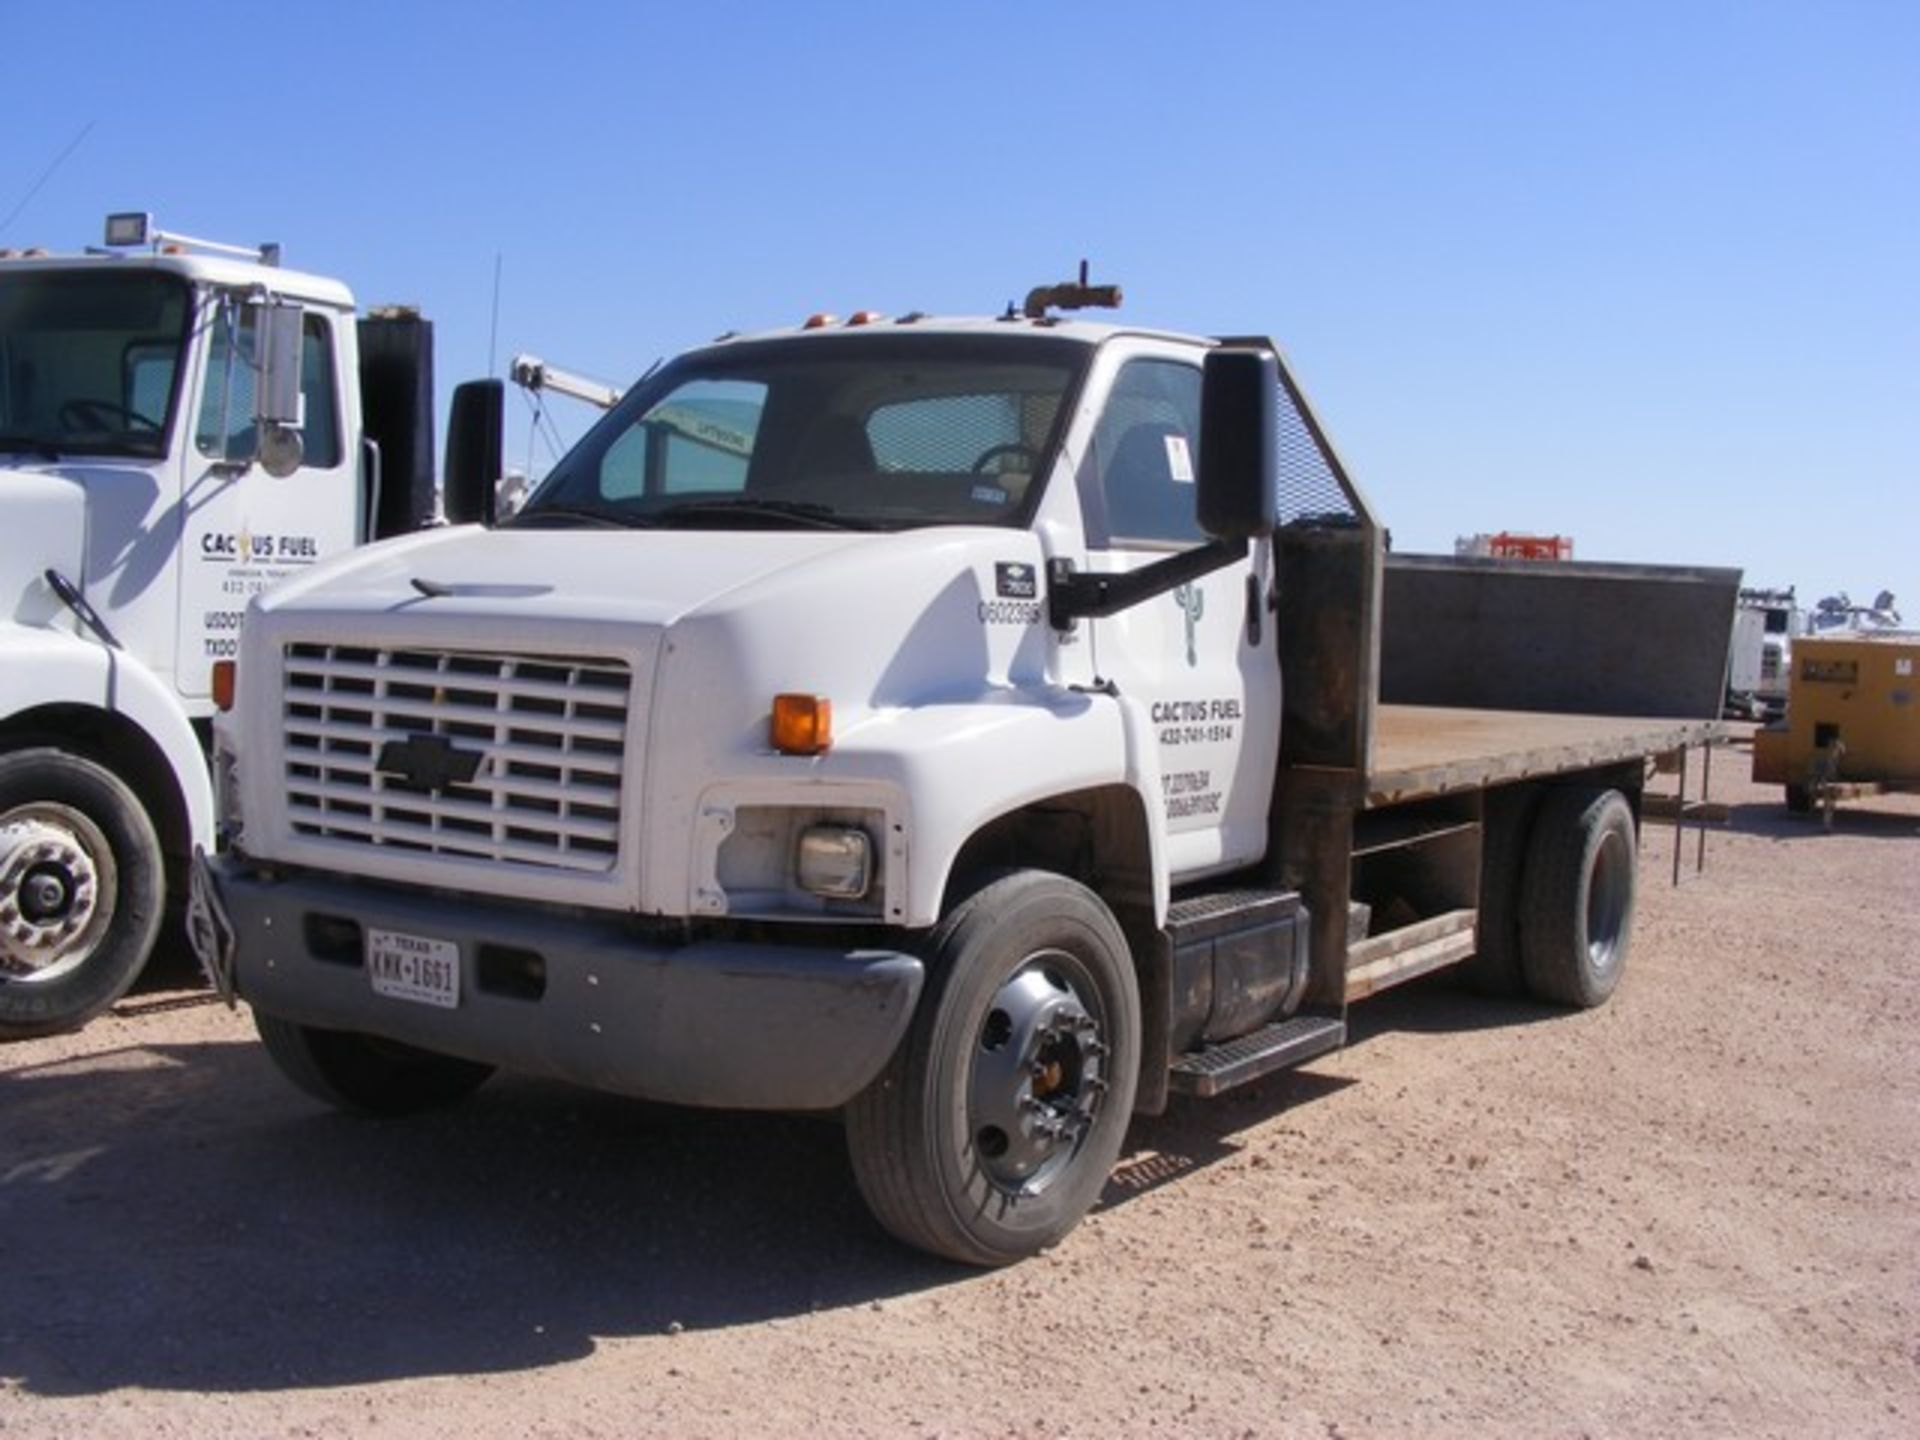 Located in YARD 1 - Midland, TX (2395) (X) 2006 CHEVROLET C7500 S/A DAY CAB STAKE BED TRUCK, VIN-